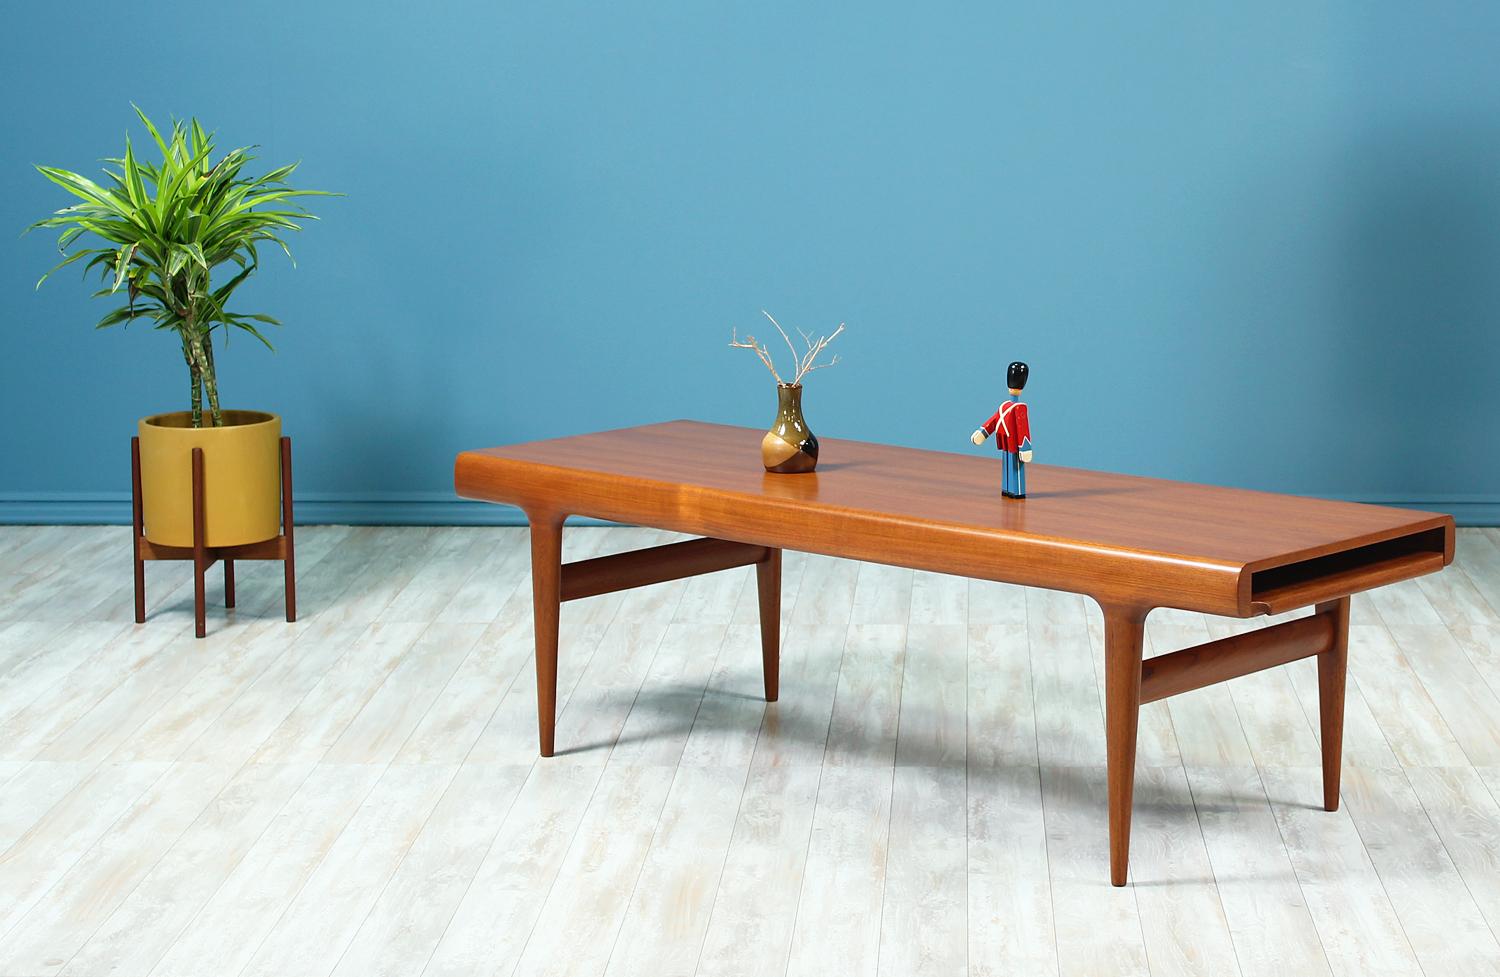 Designer: Johannes Andersen
Manufacturer: Uldum Mobelfabrik
Country of origin: Denmark
Date of manufacture: 1950-1959
Materials: Teak wood
Period style: Danish modern

Condition: Excellent
Extra conditions: Newly refinished
Dimensions: